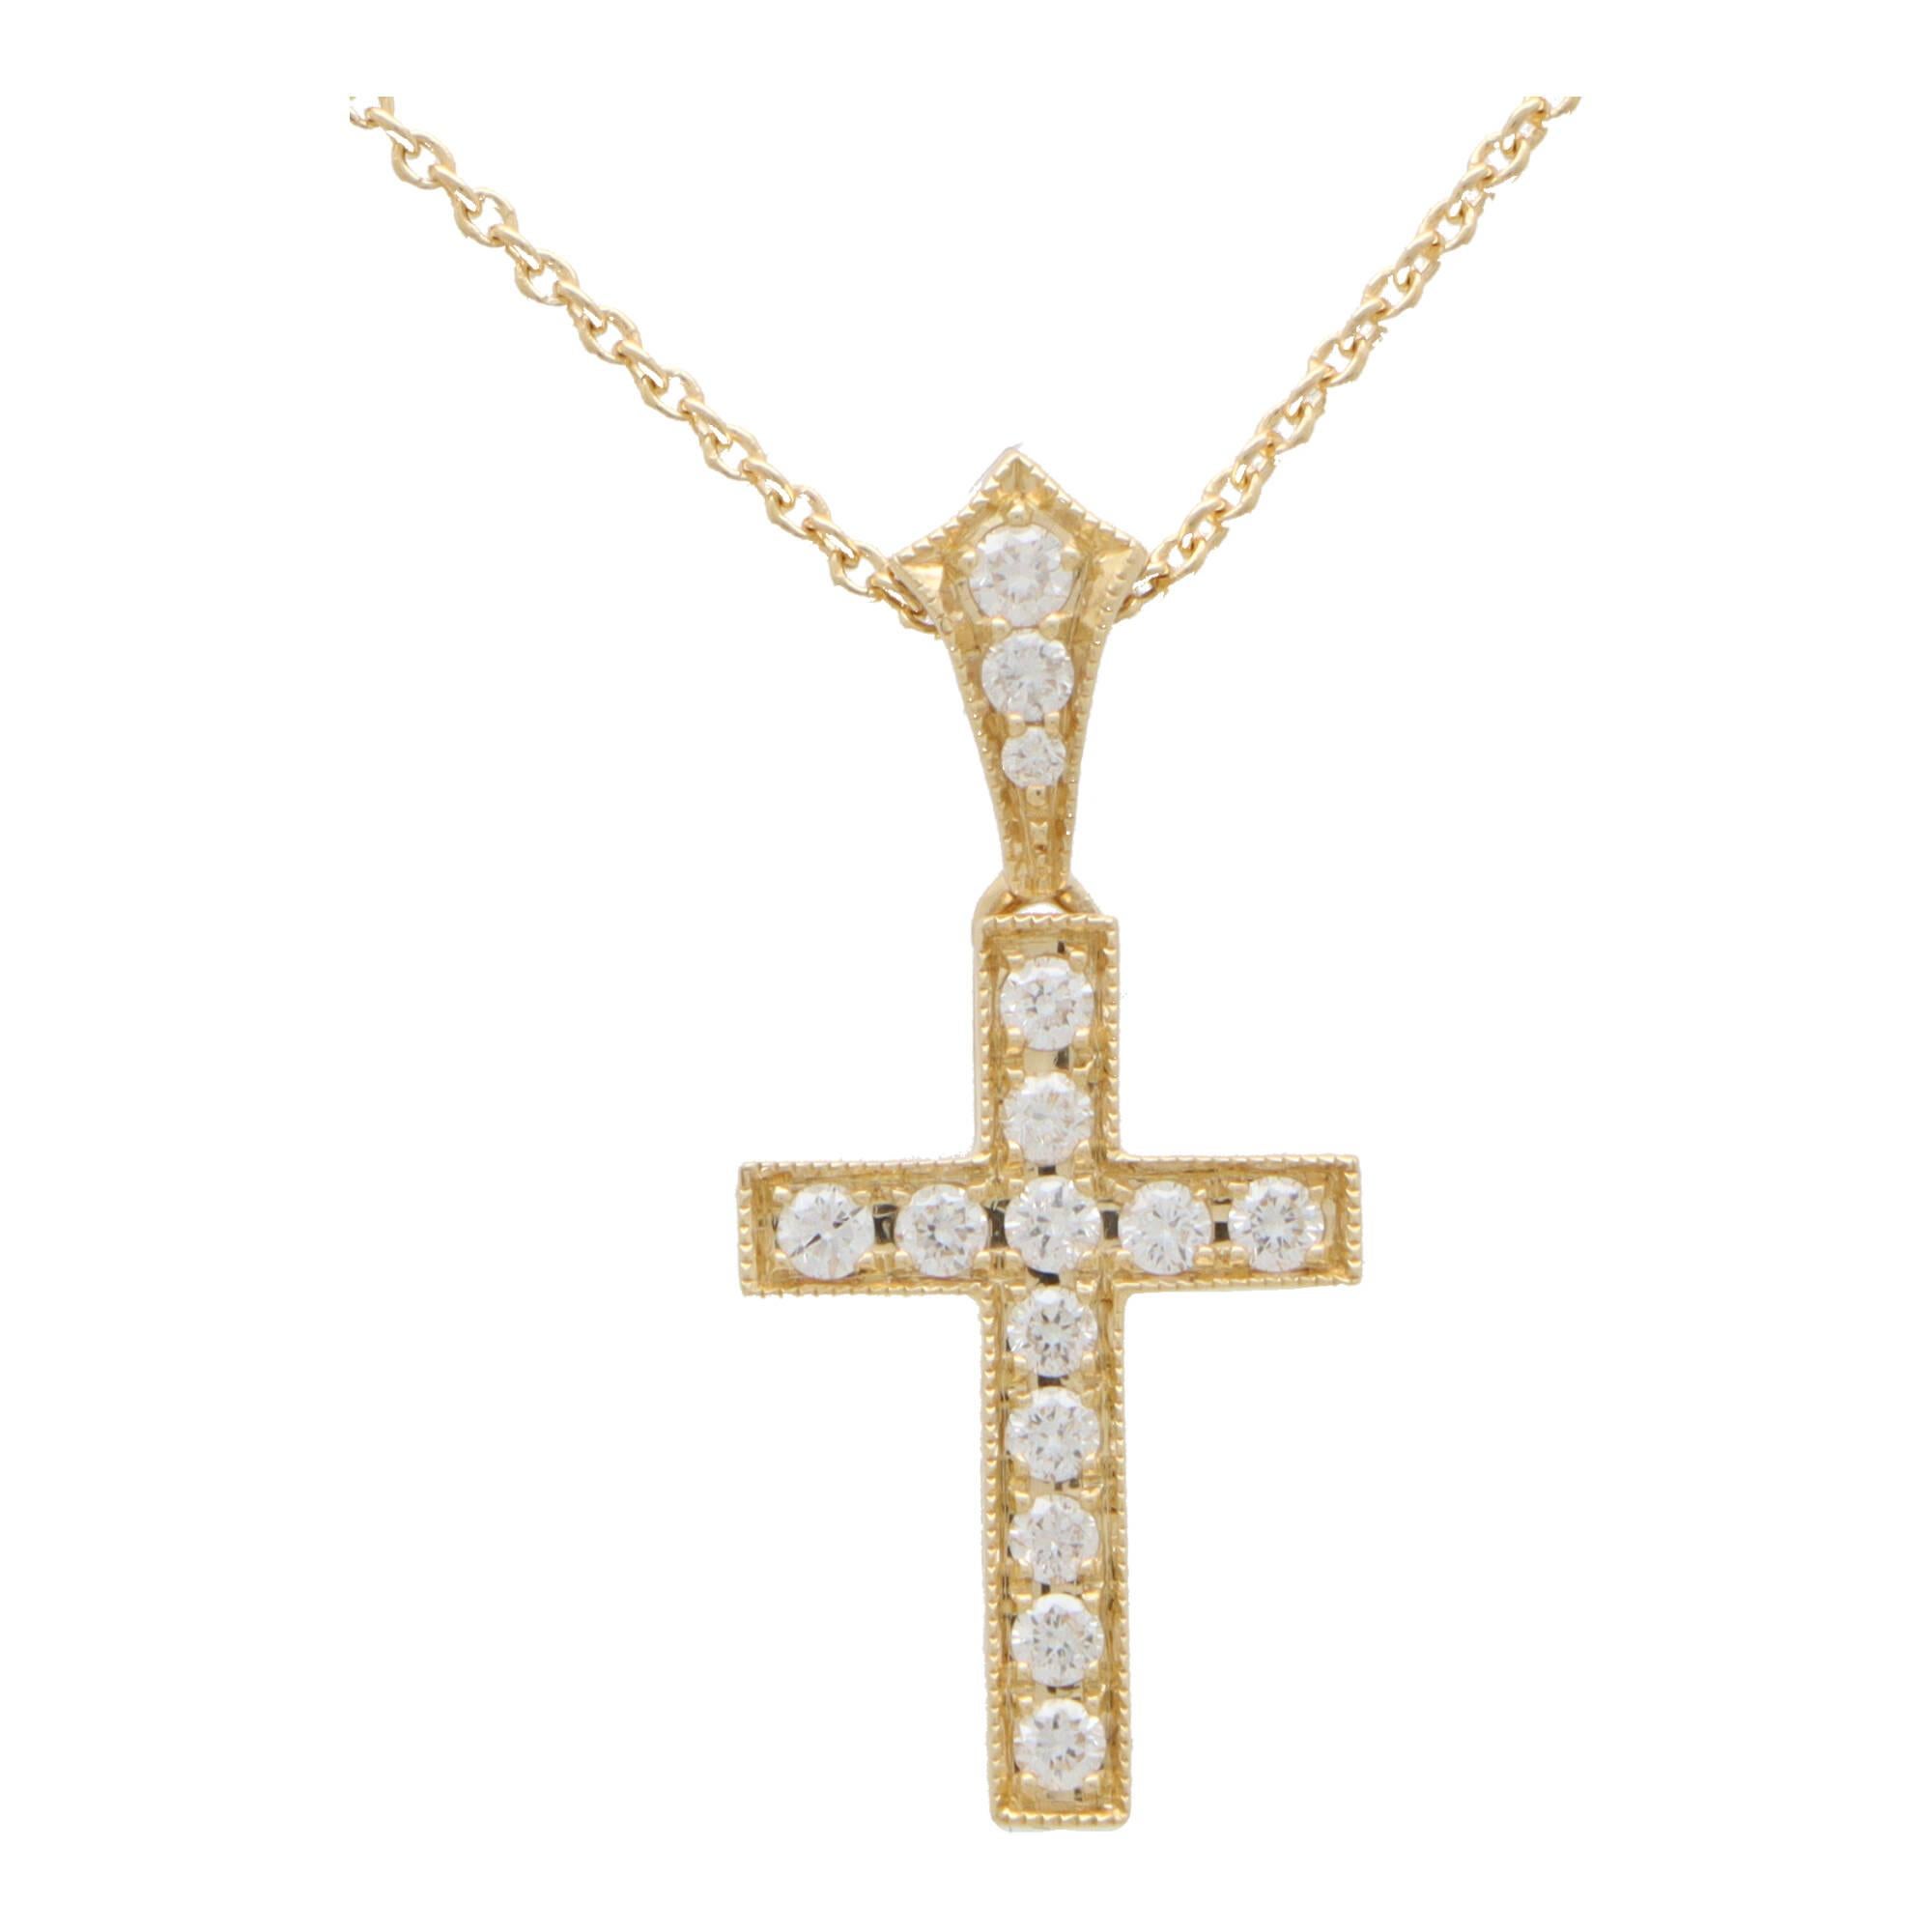  A beautiful diamond cross pendant necklace set in 18k yellow gold.

The pendant depicts a cross motif and is pave set with exactly 12 round brilliant cut diamonds. The cross hangs from a diamond set bail which is also set with graduating diamonds.